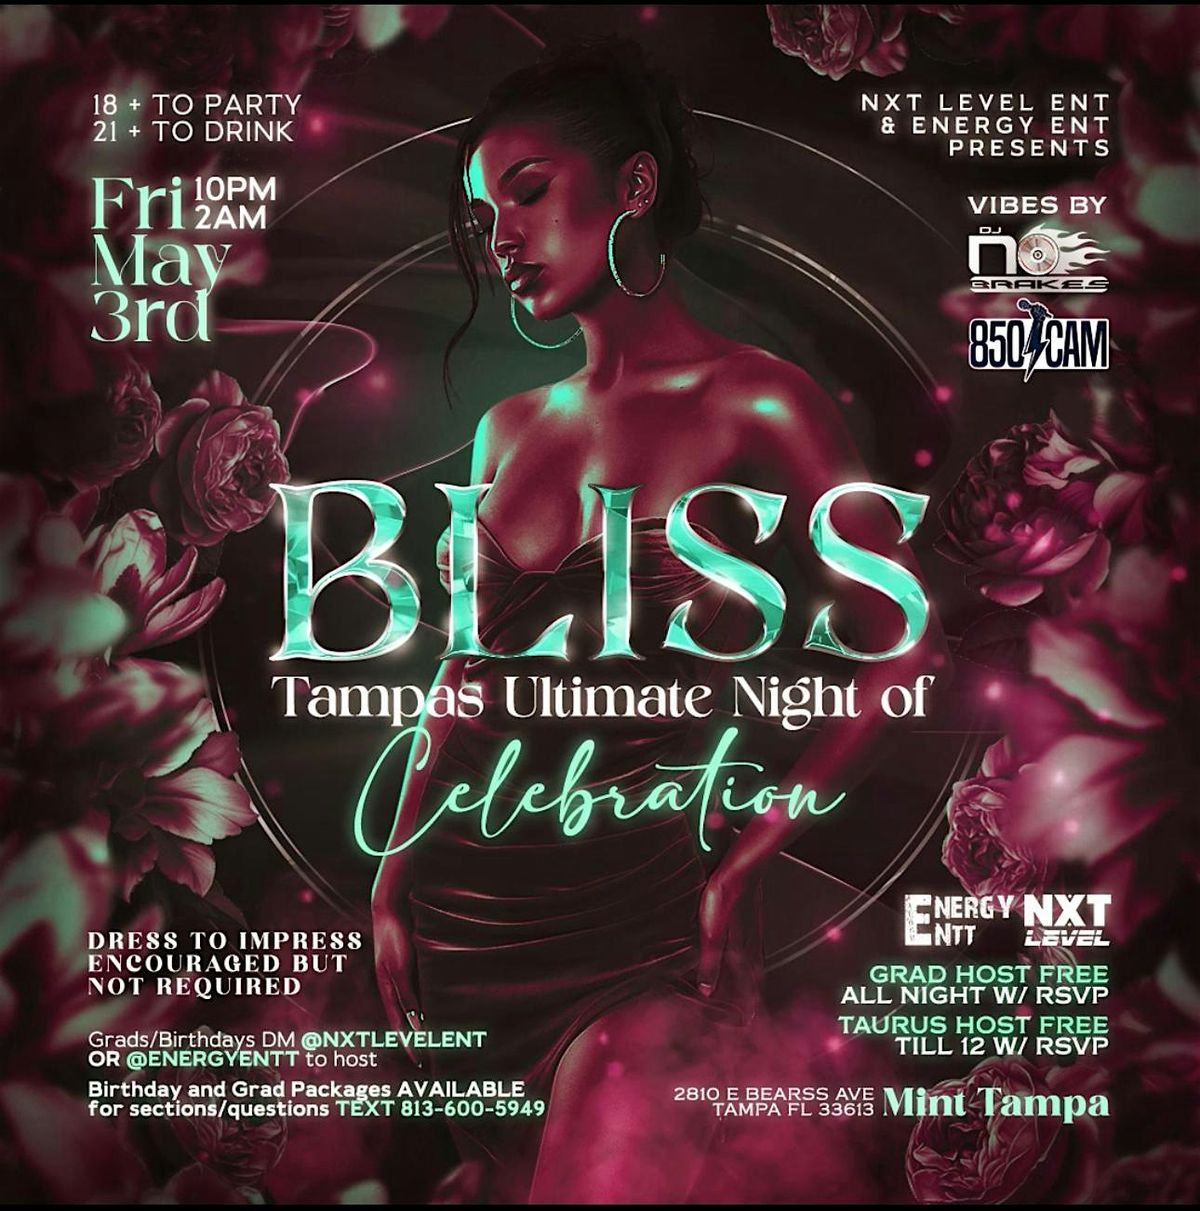 Bliss: Tampa's Ultimate Night of Celebration